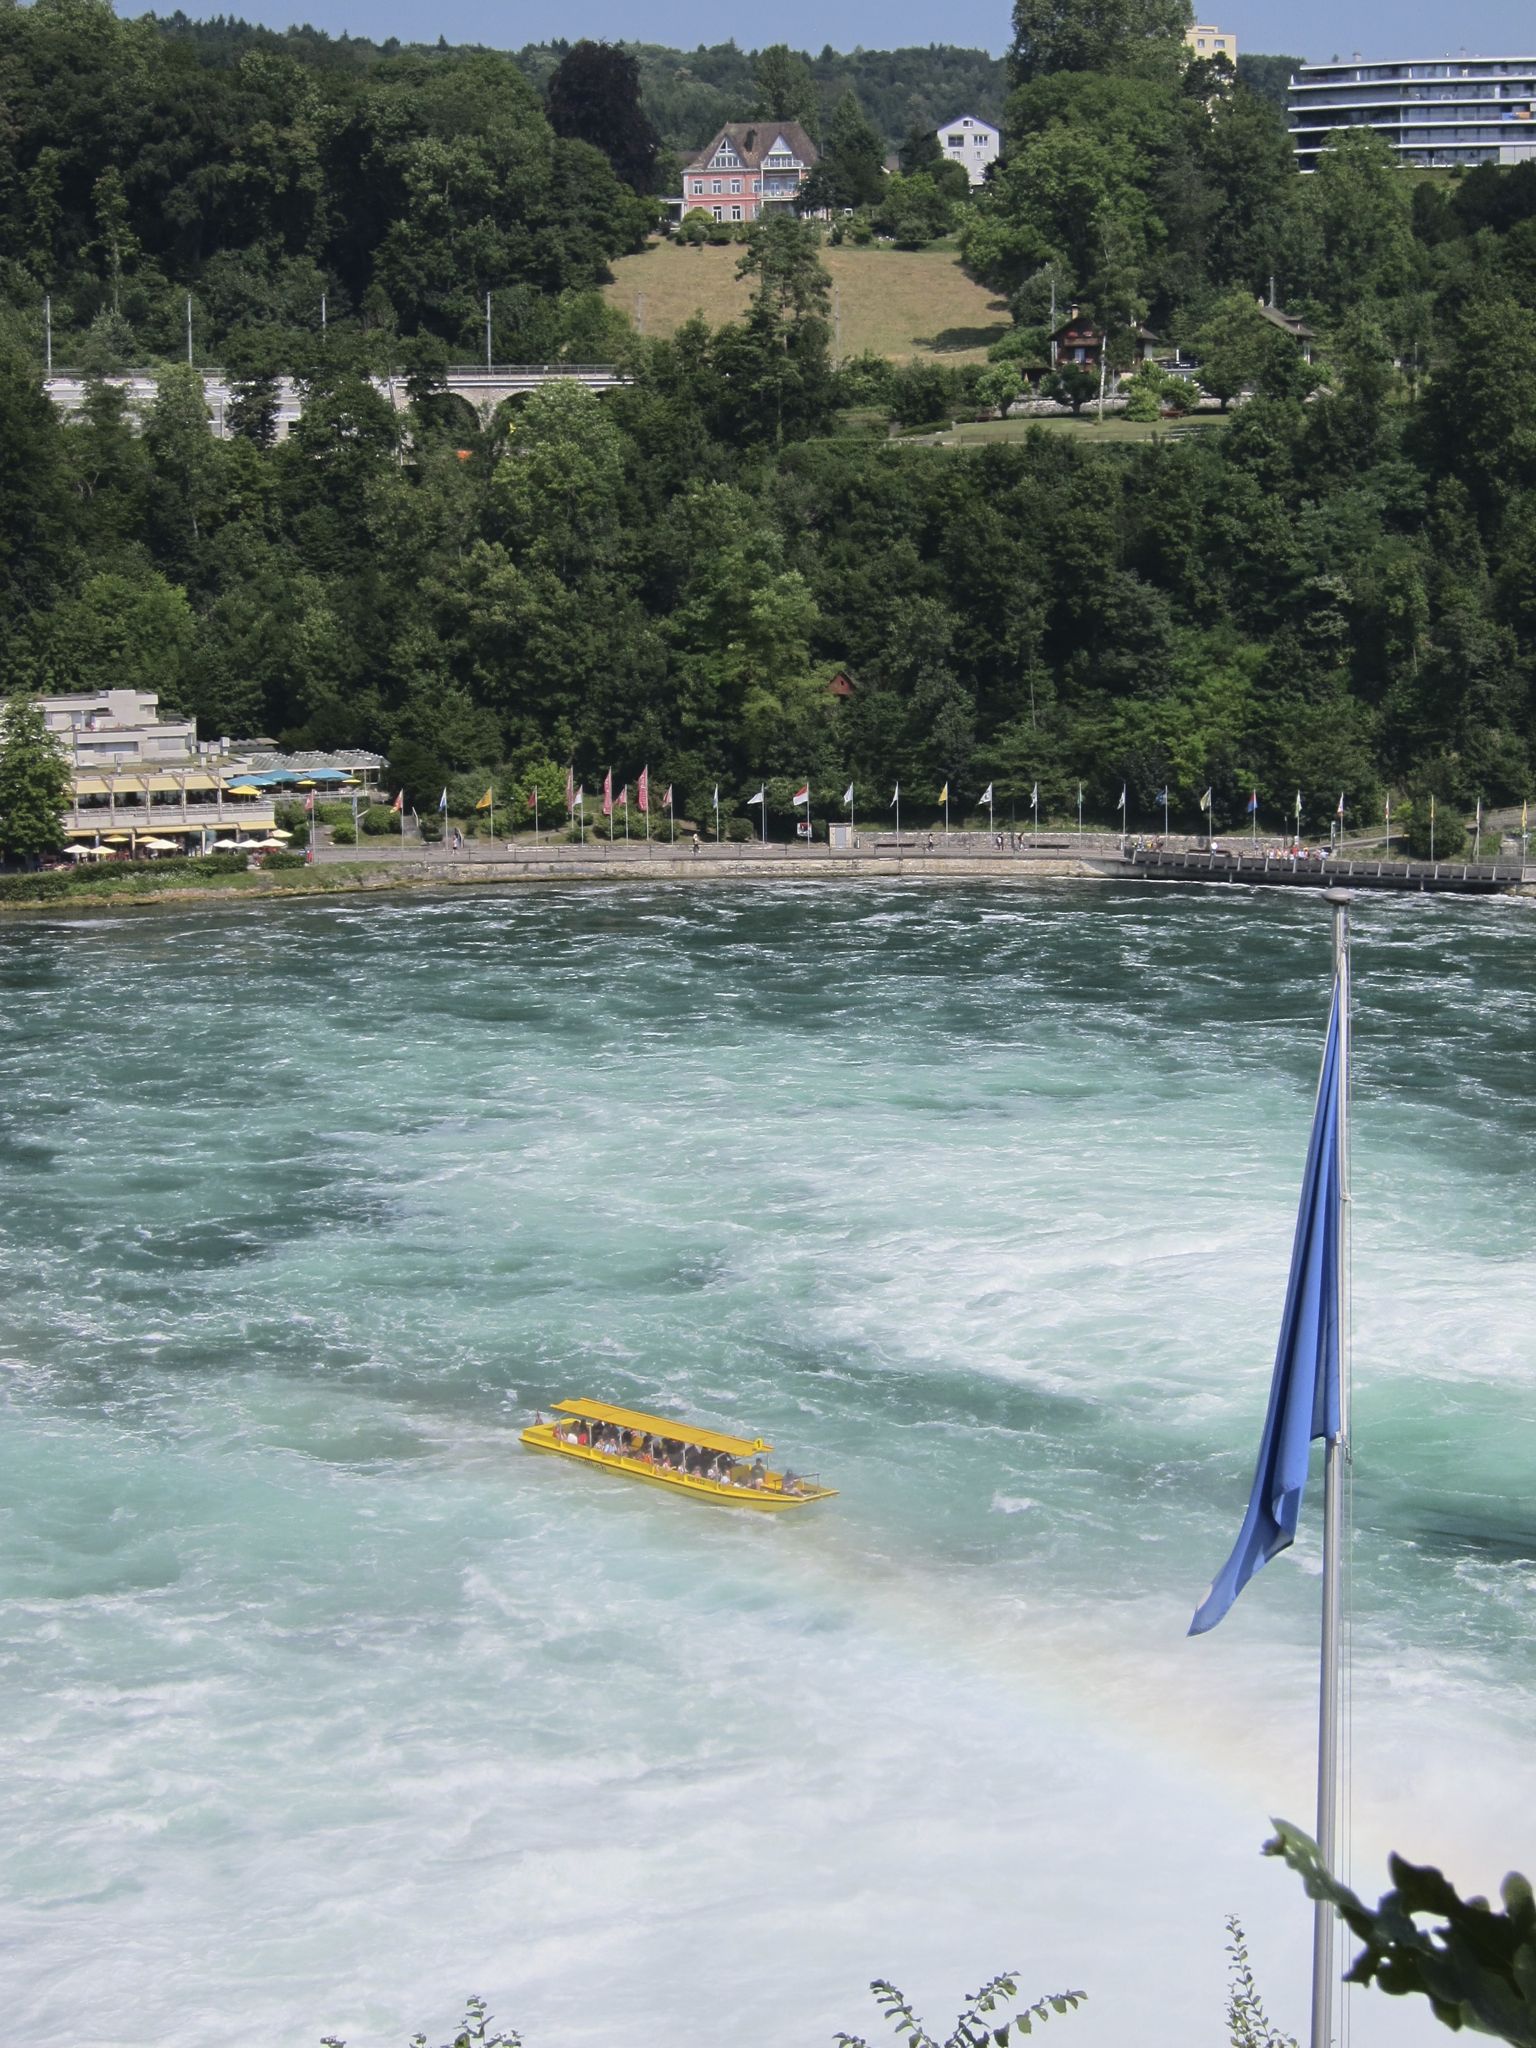 Photo 3 of 22 from the album Rheinfall.